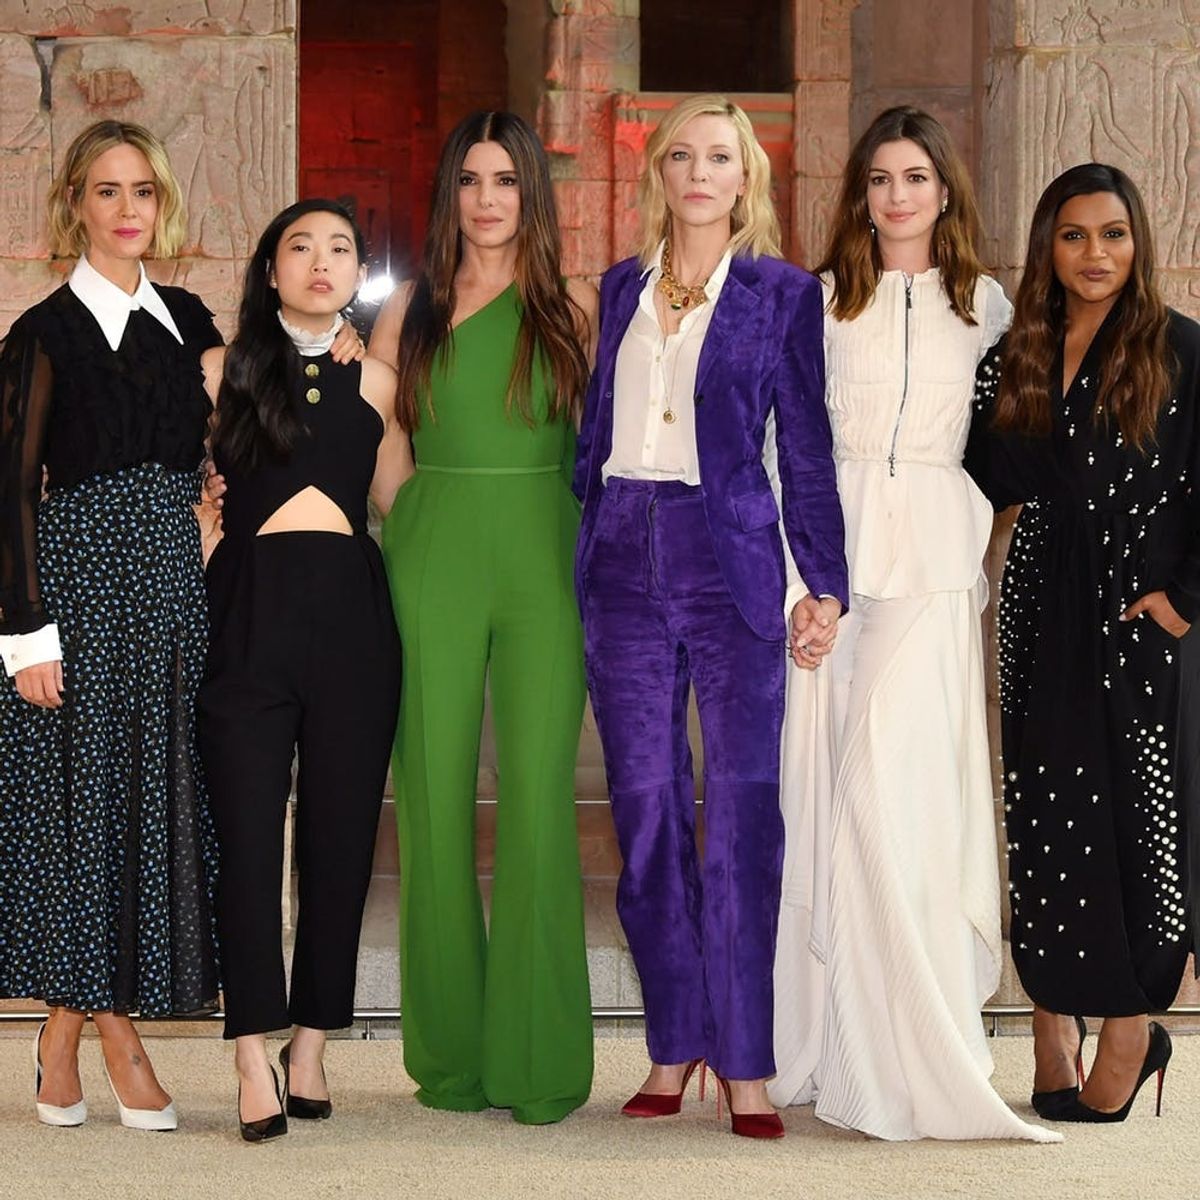 Sanrda Bullock Made the ‘Ocean’s 8’ Ladies Delete Their Group Text for This Totally Valid Reason